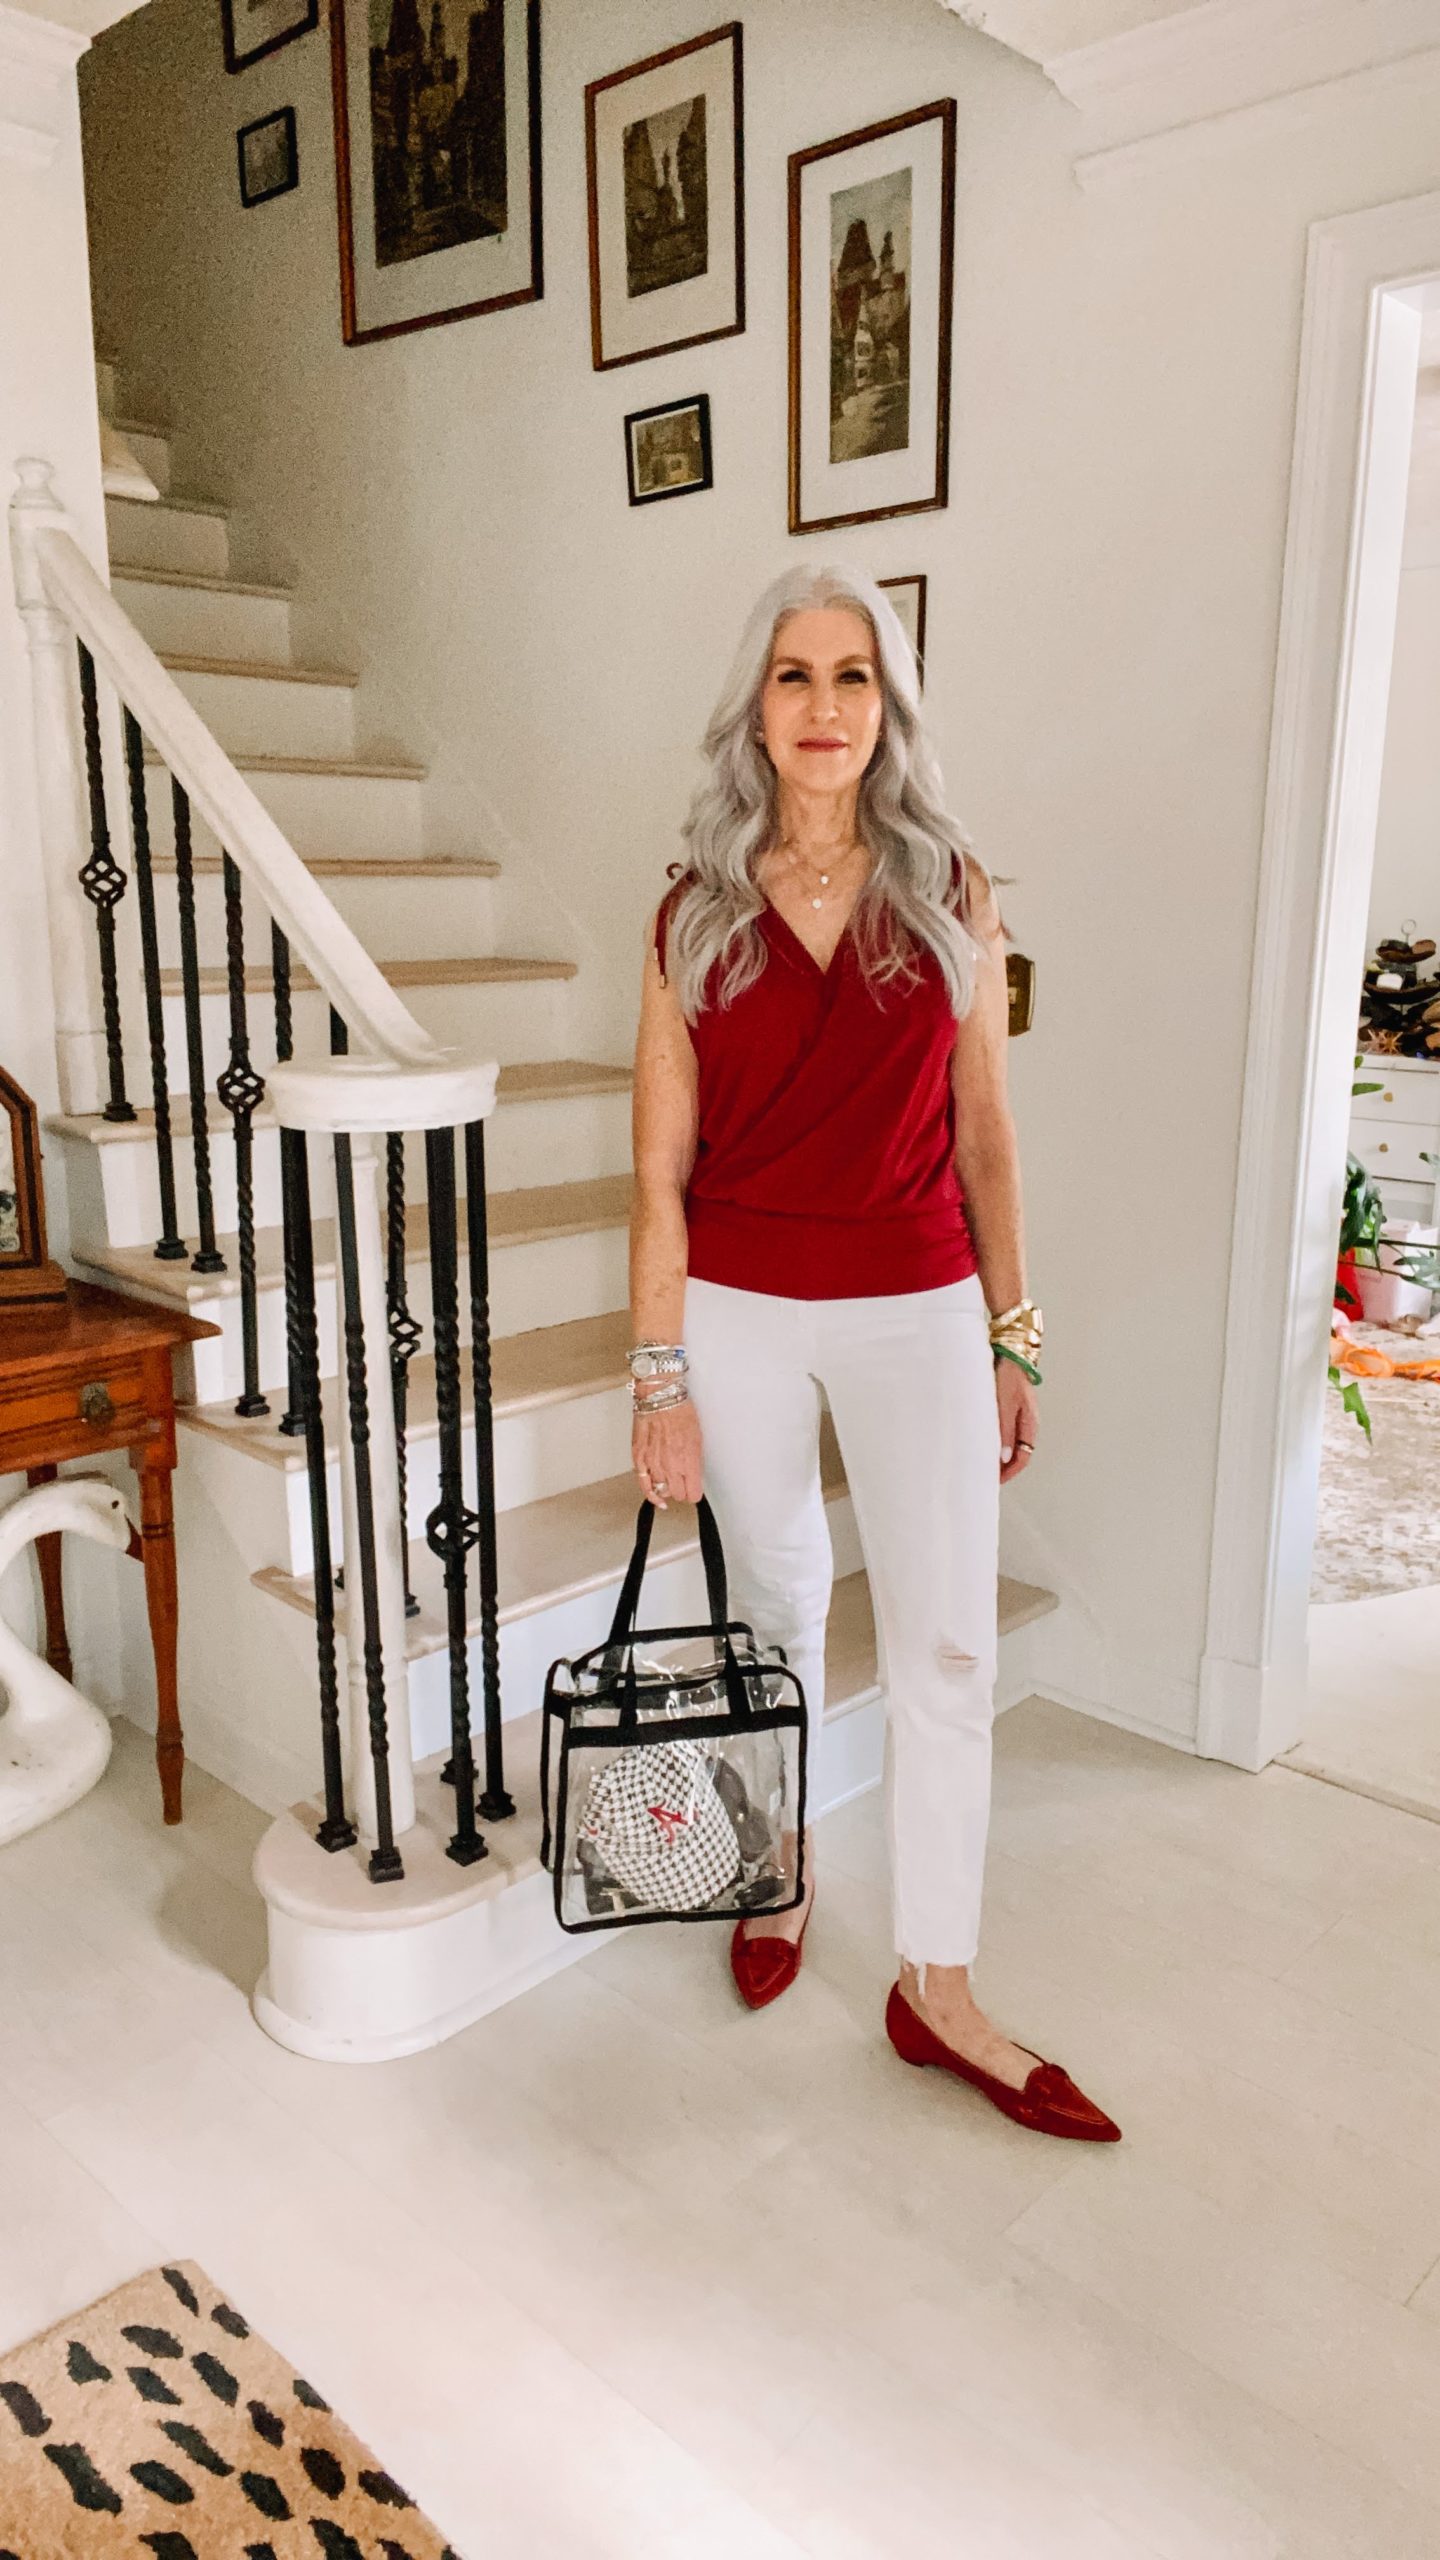 silver hair lady wearing white pants and maroon top